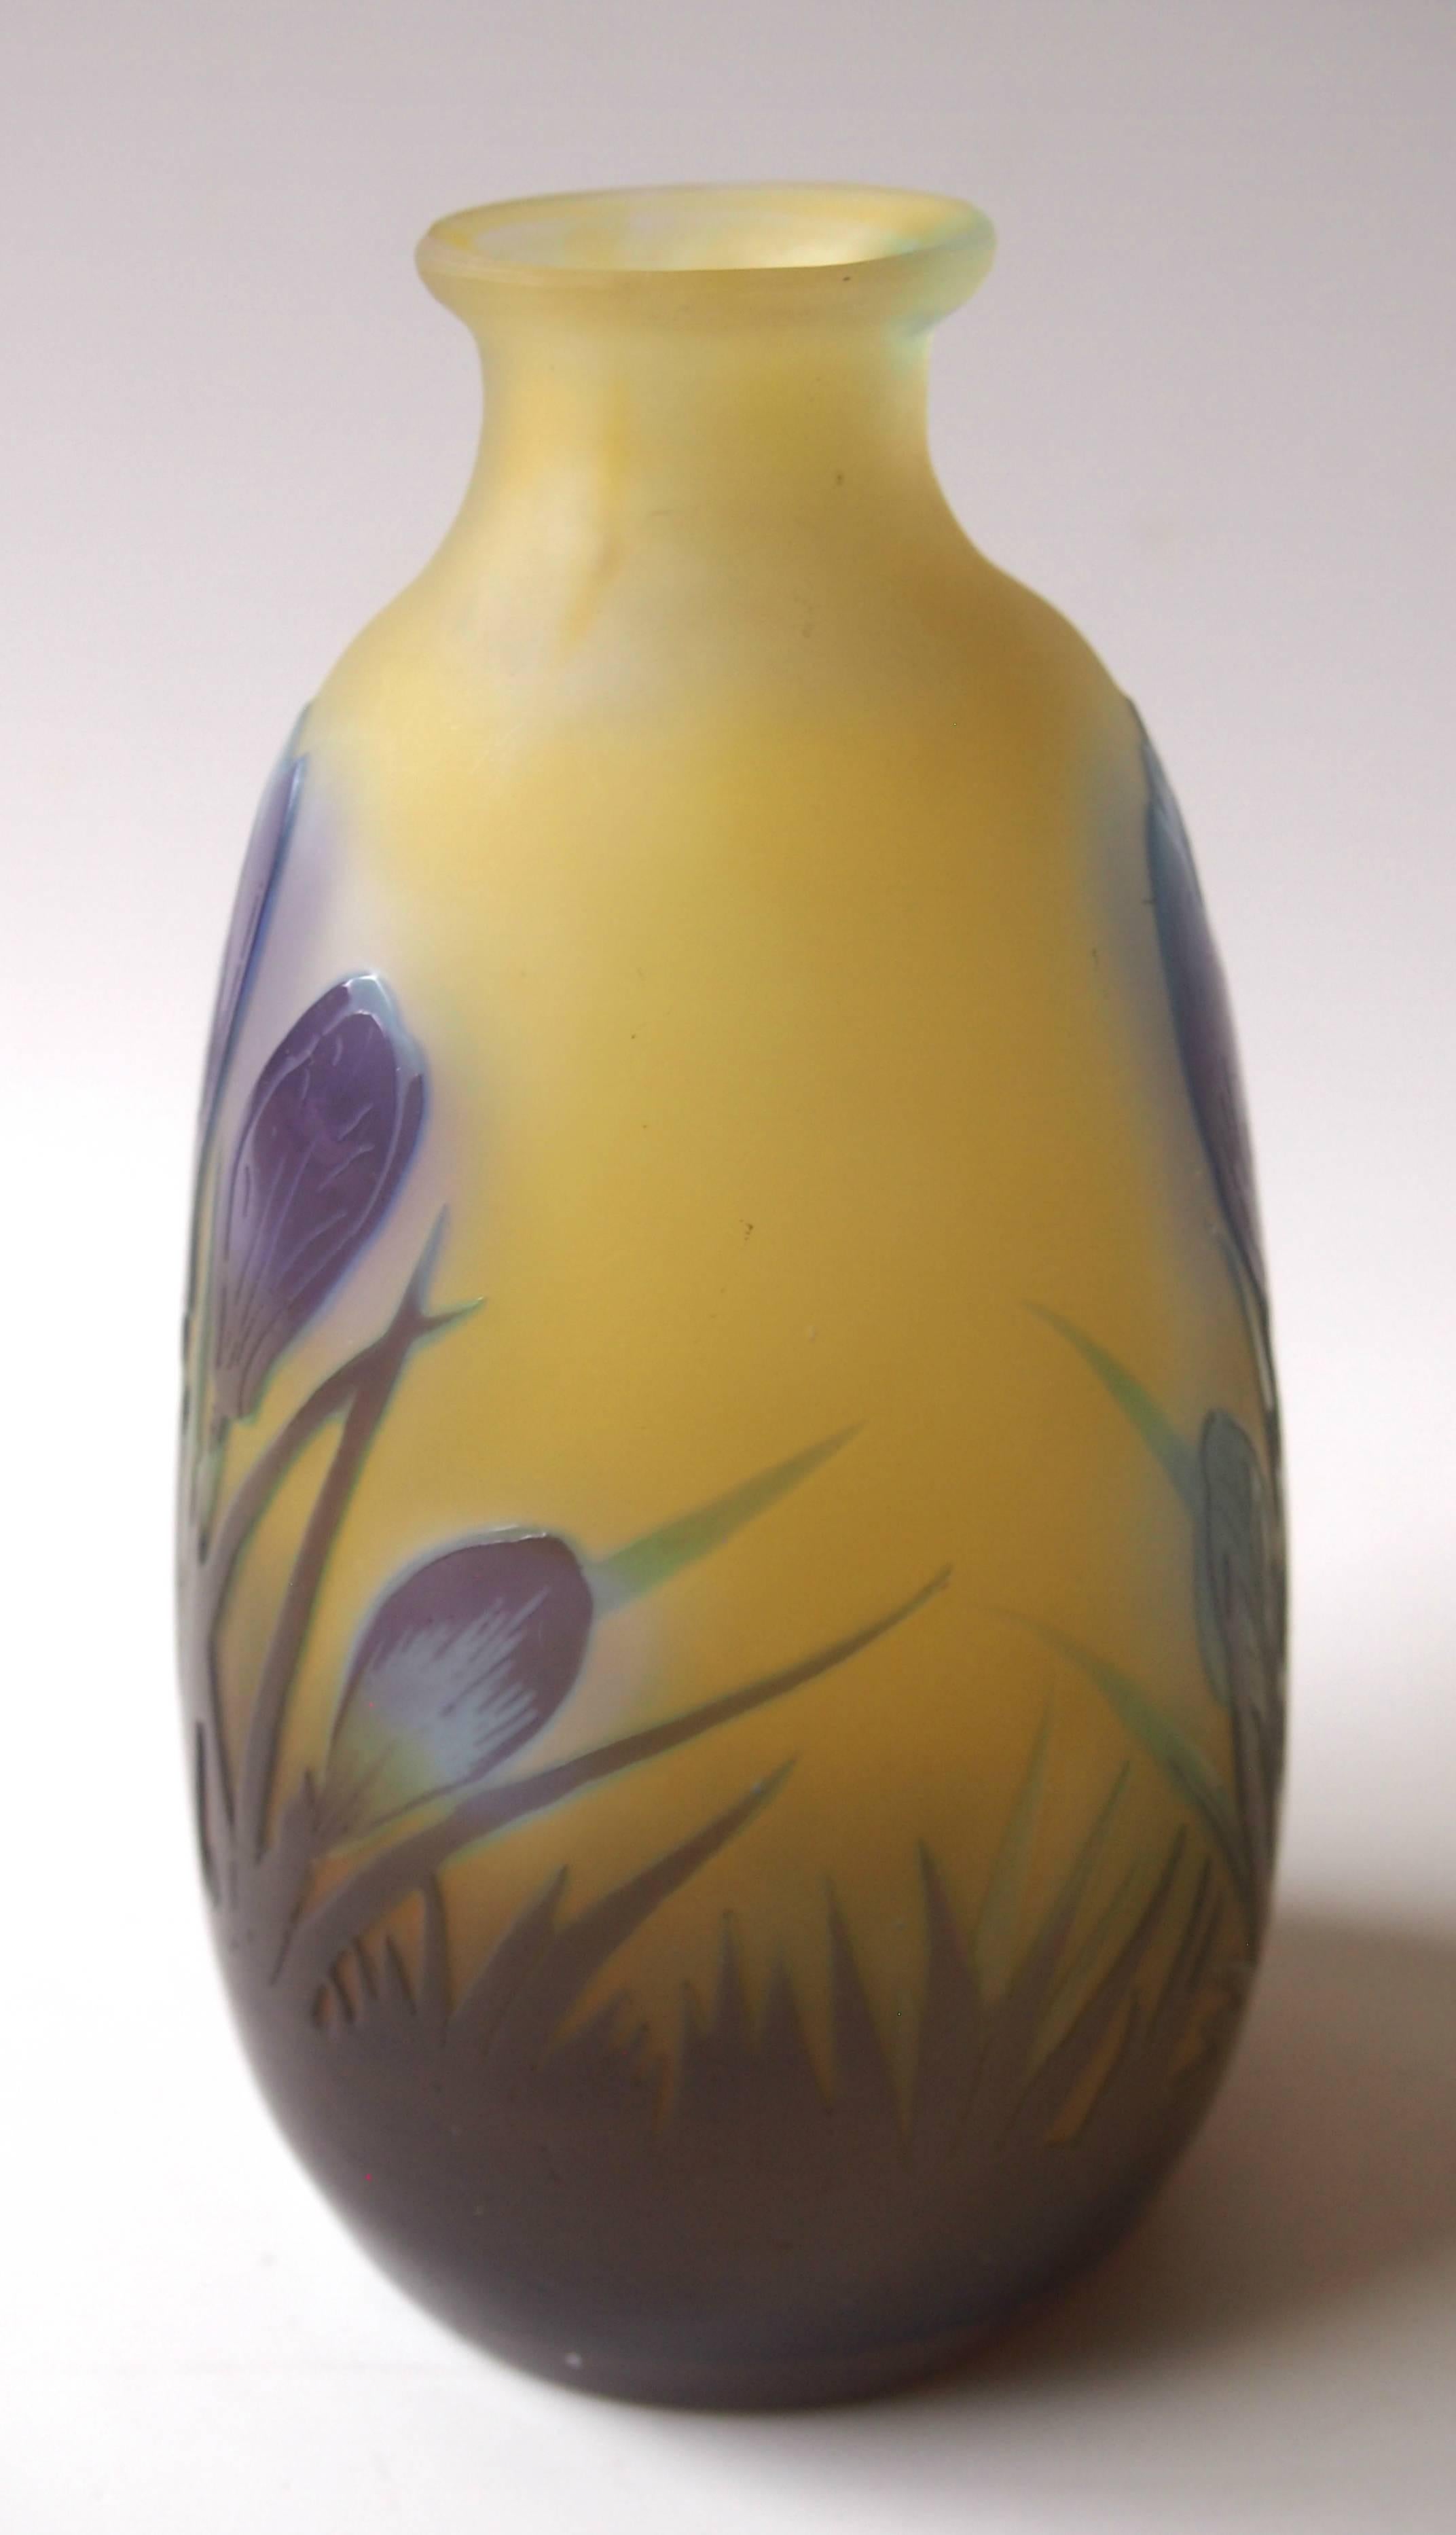 Wonderful Emile Galle Cameo purple and blue over yellow vase, circa 1900 depicting vibrant blooming Croci. The signature is cut into the purple layer. The vase is selectively internally polished (with acid) to remove the inner orange layer and